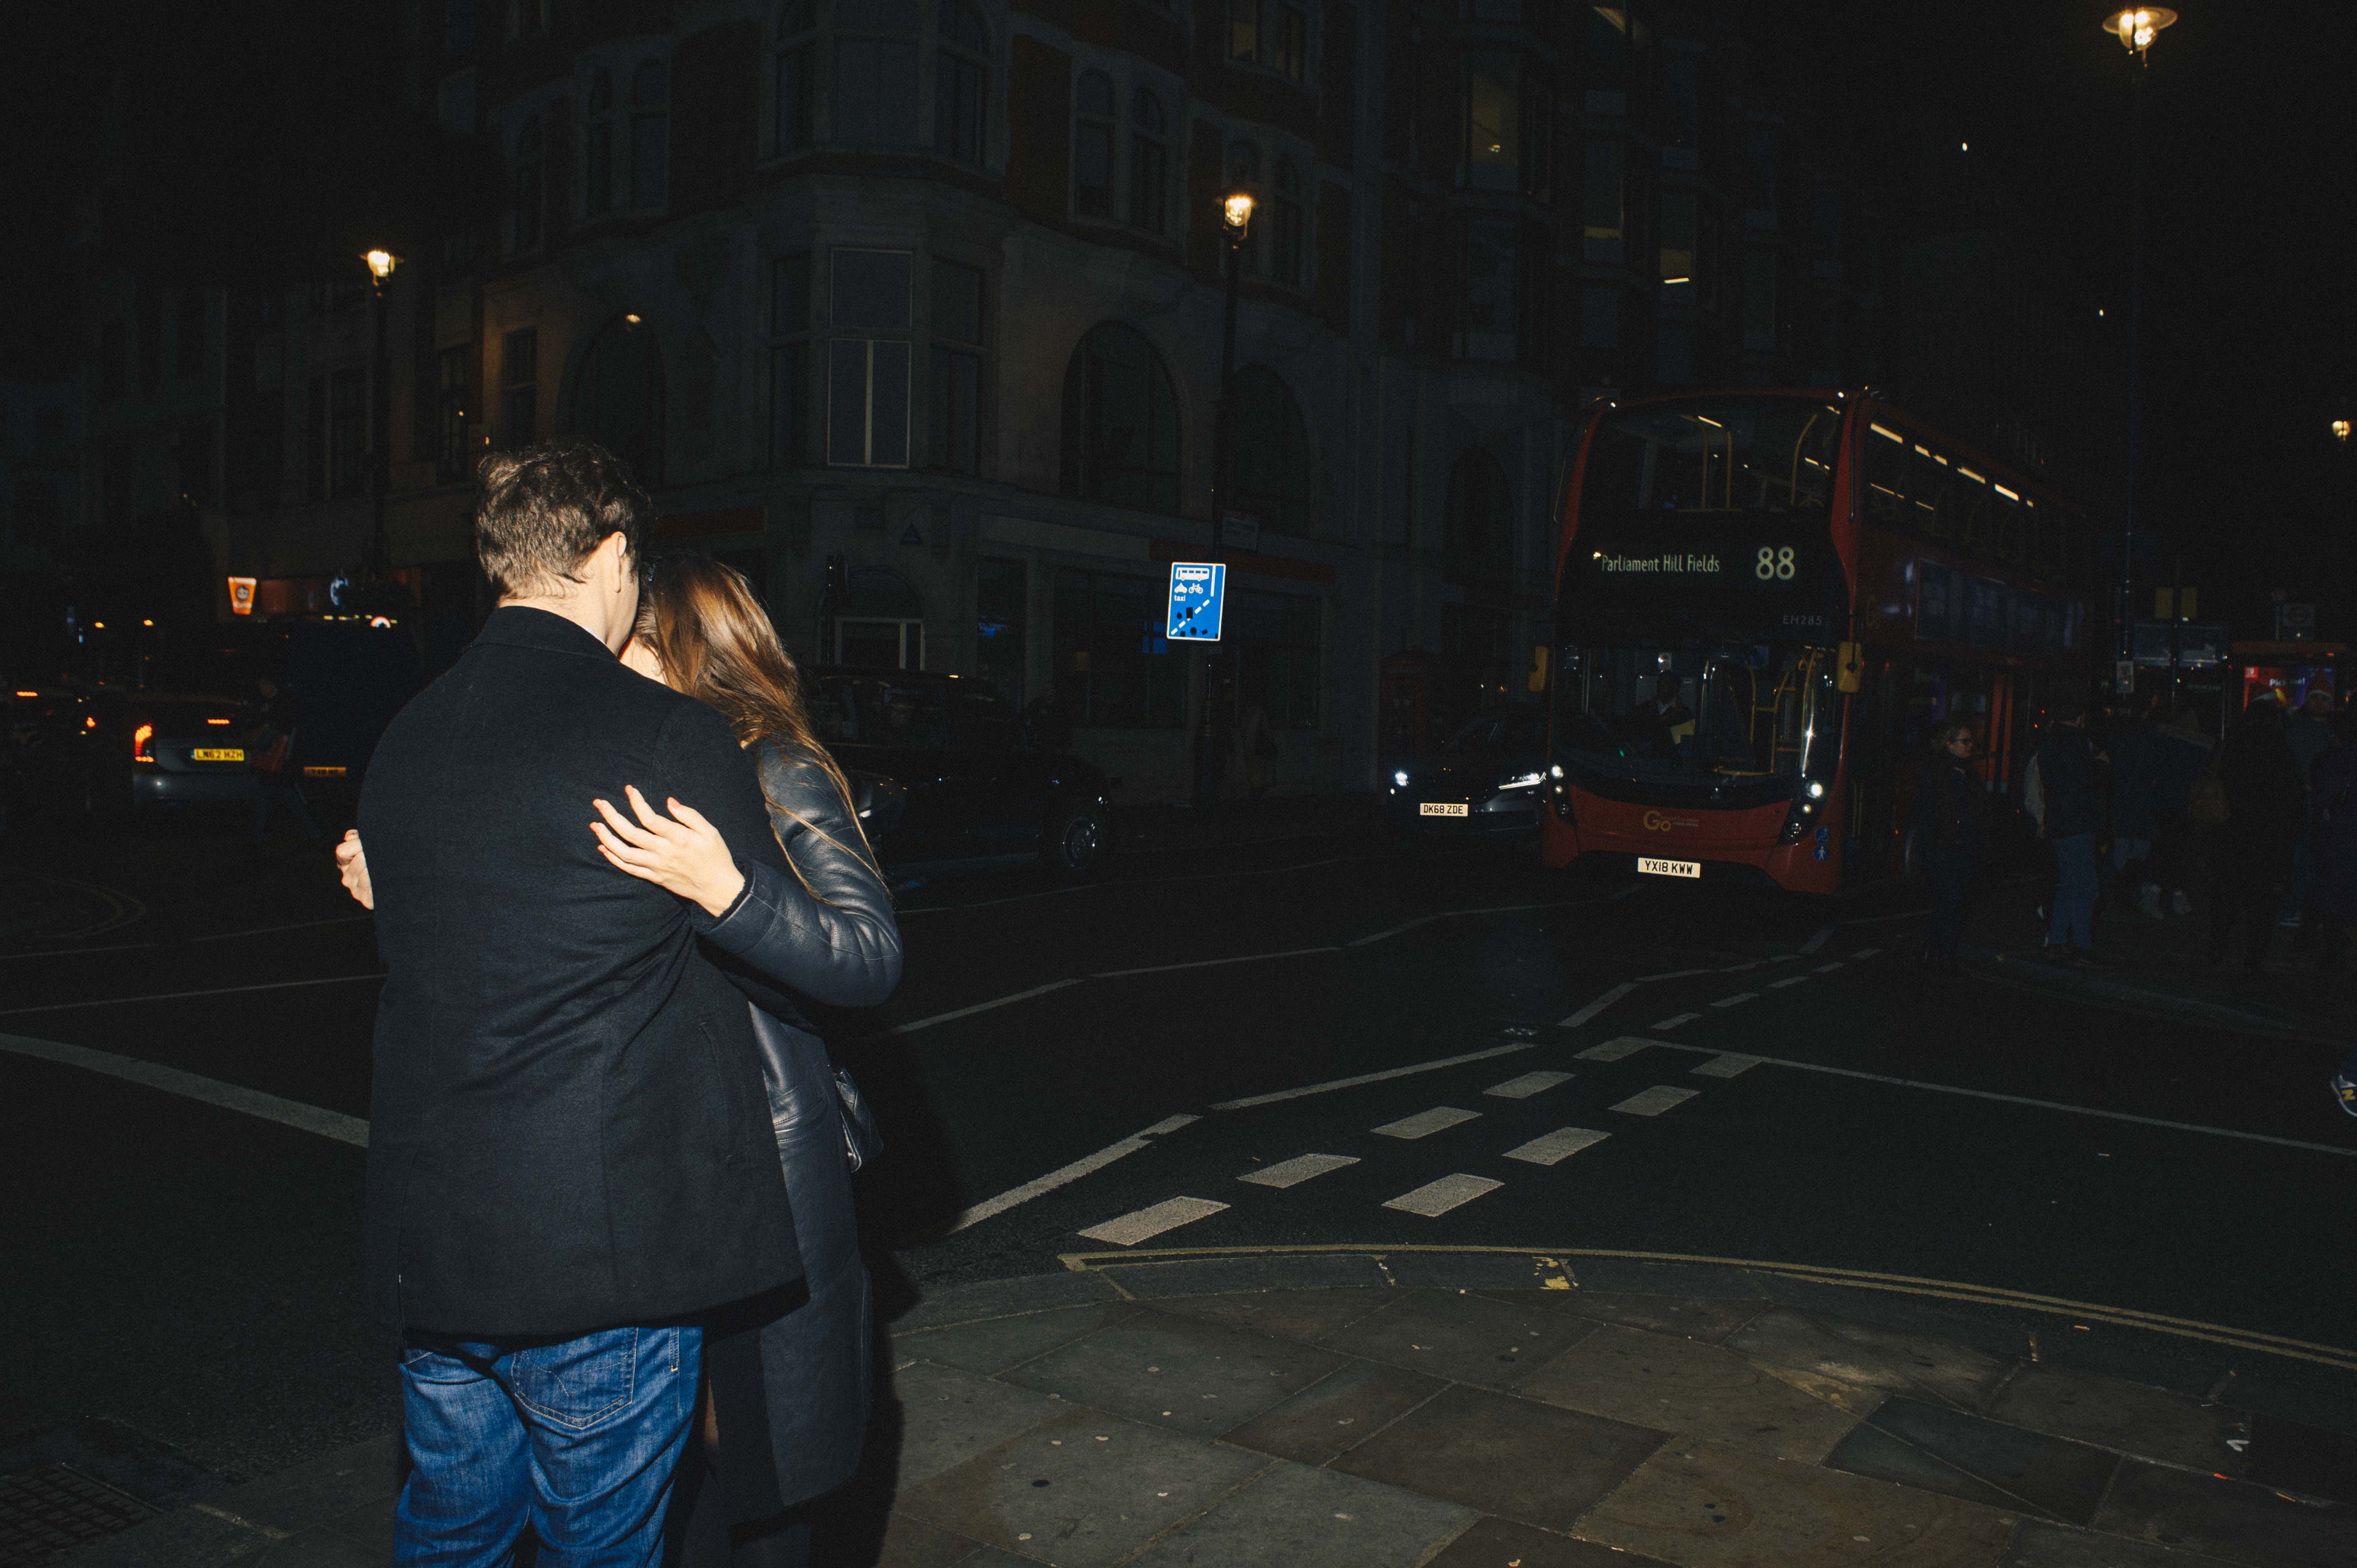 A couple embraces each other on a street corner.